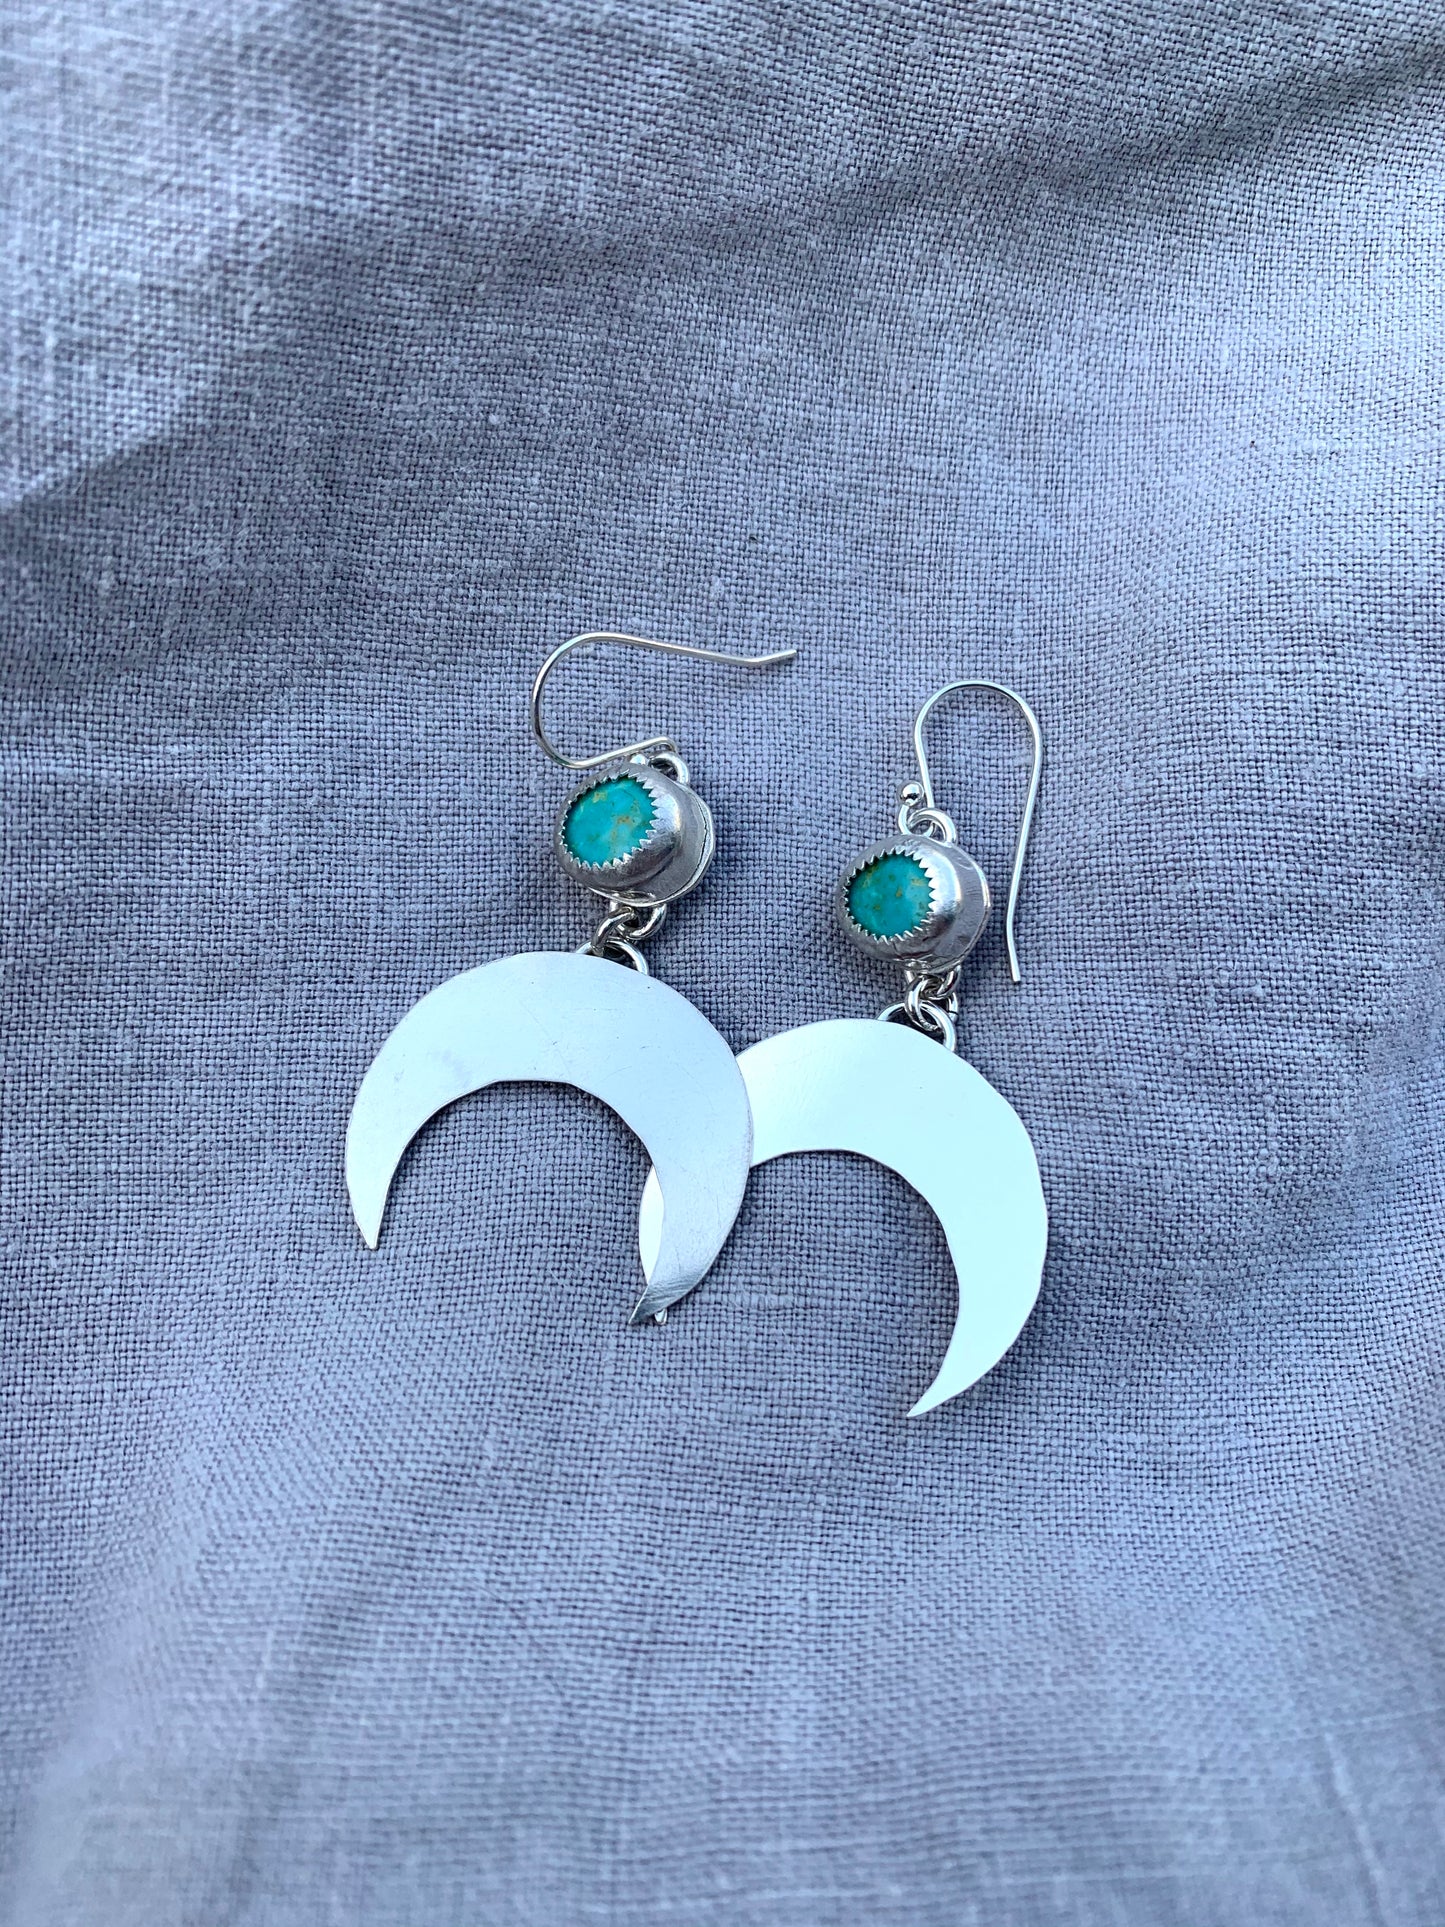 Turquoise Crescent Moon Earrings